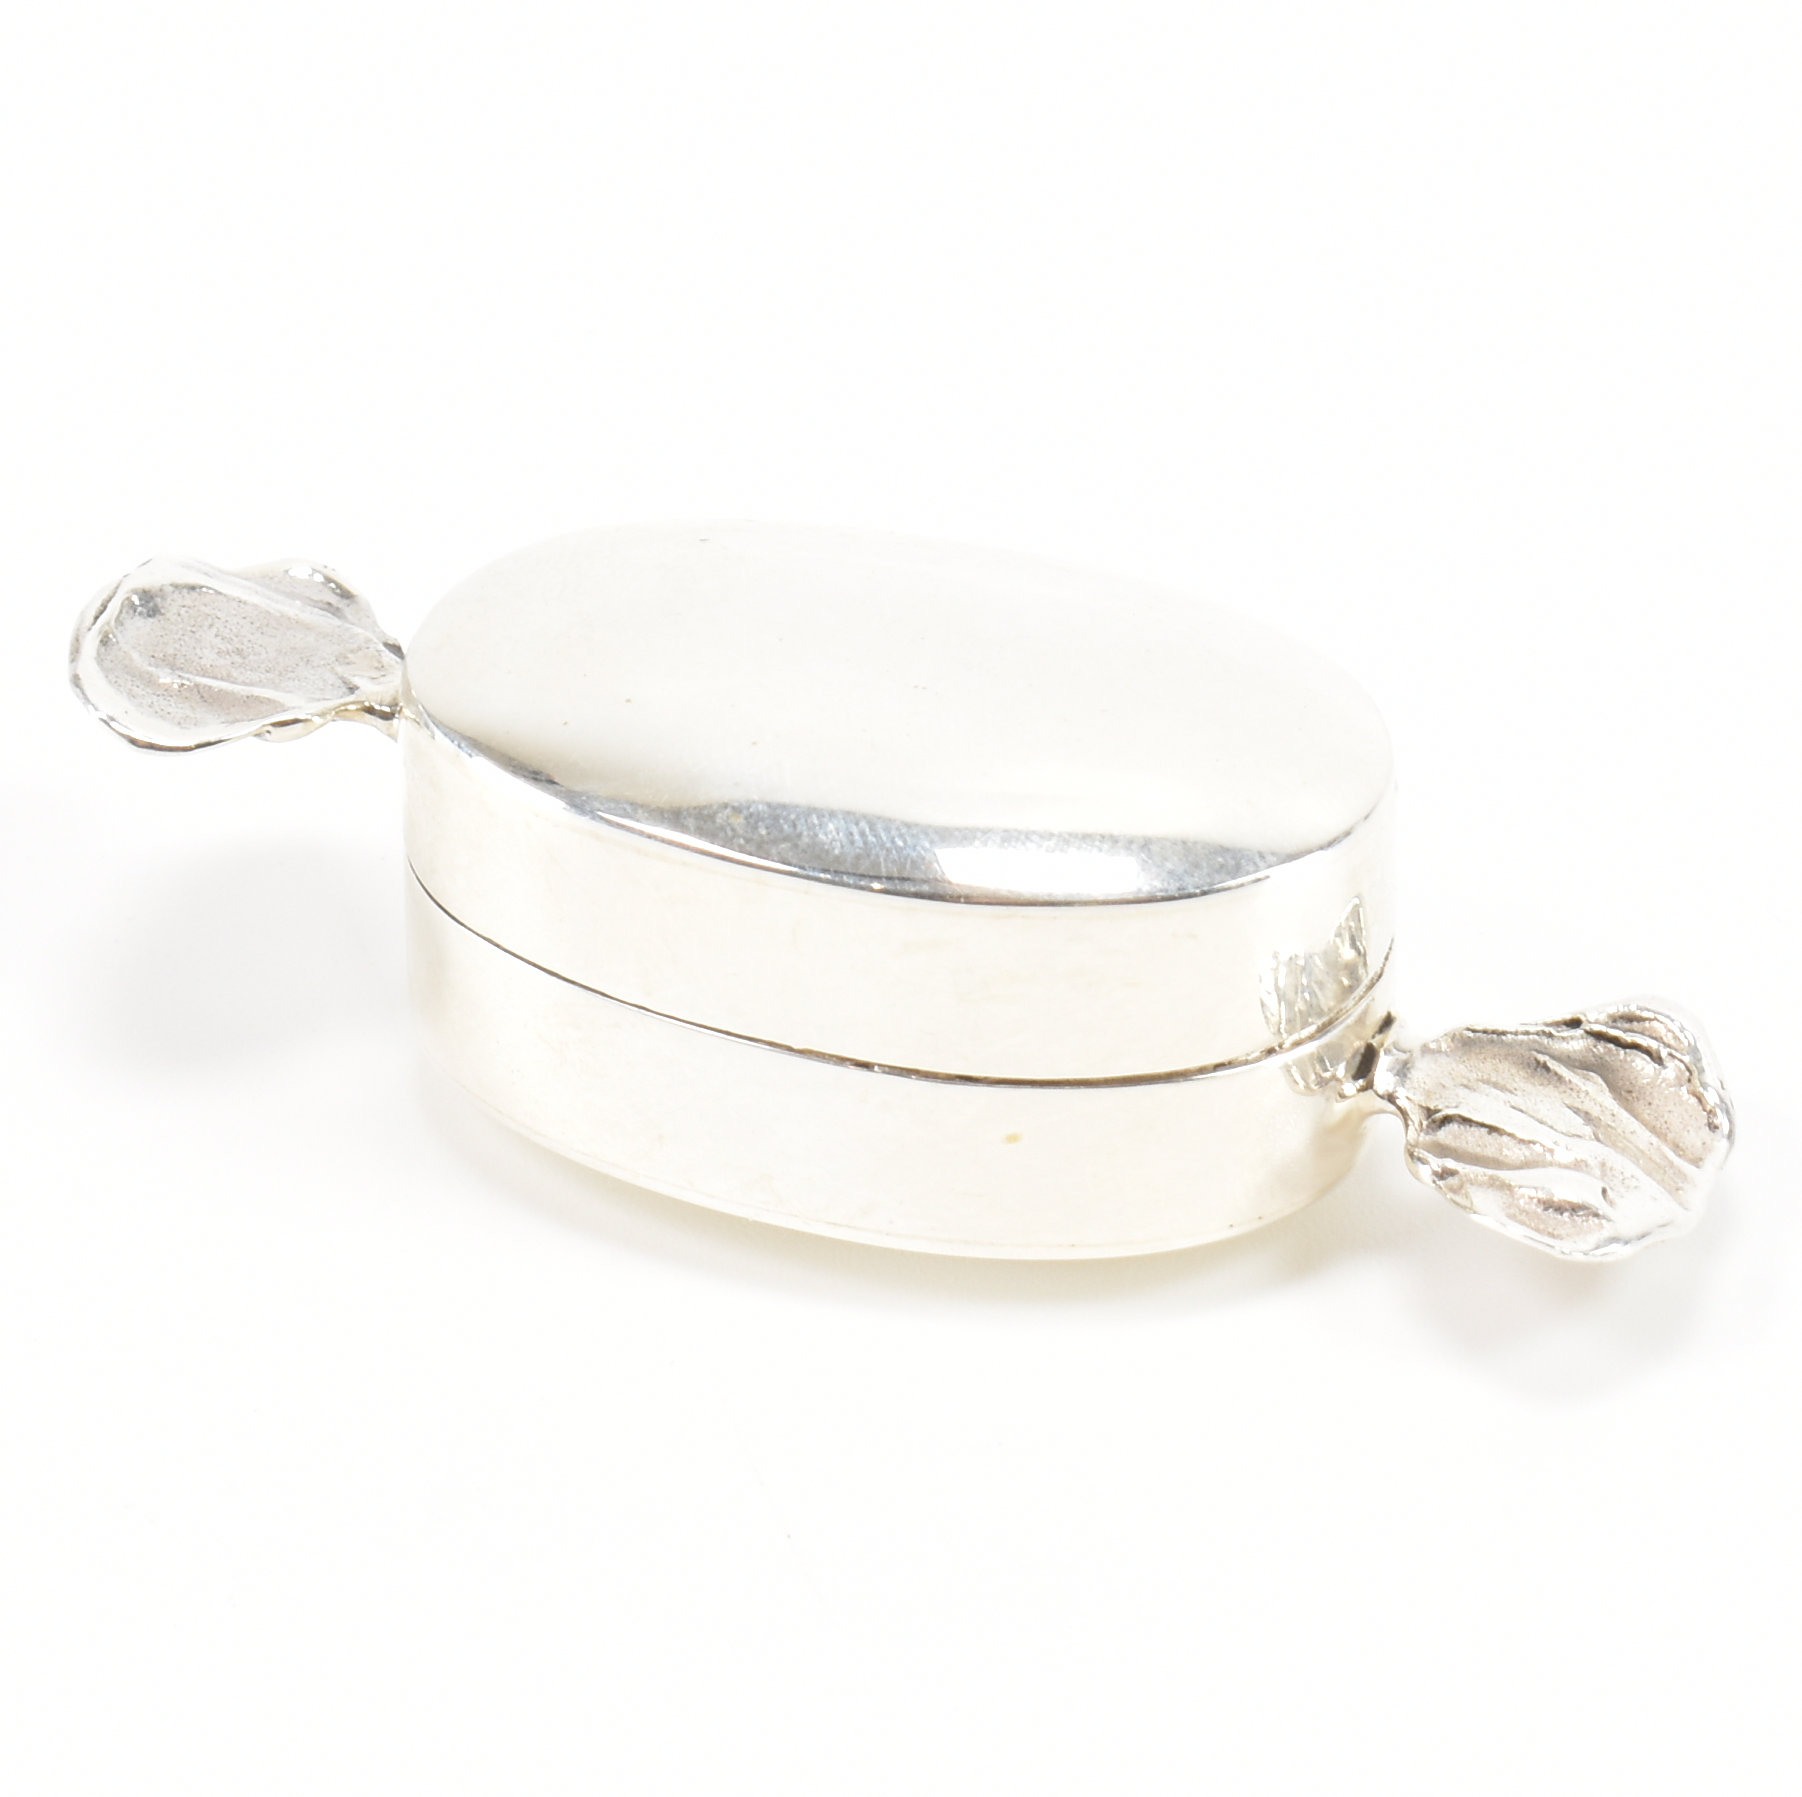 SILVER PILL BOX IN FORM OF A SWEET